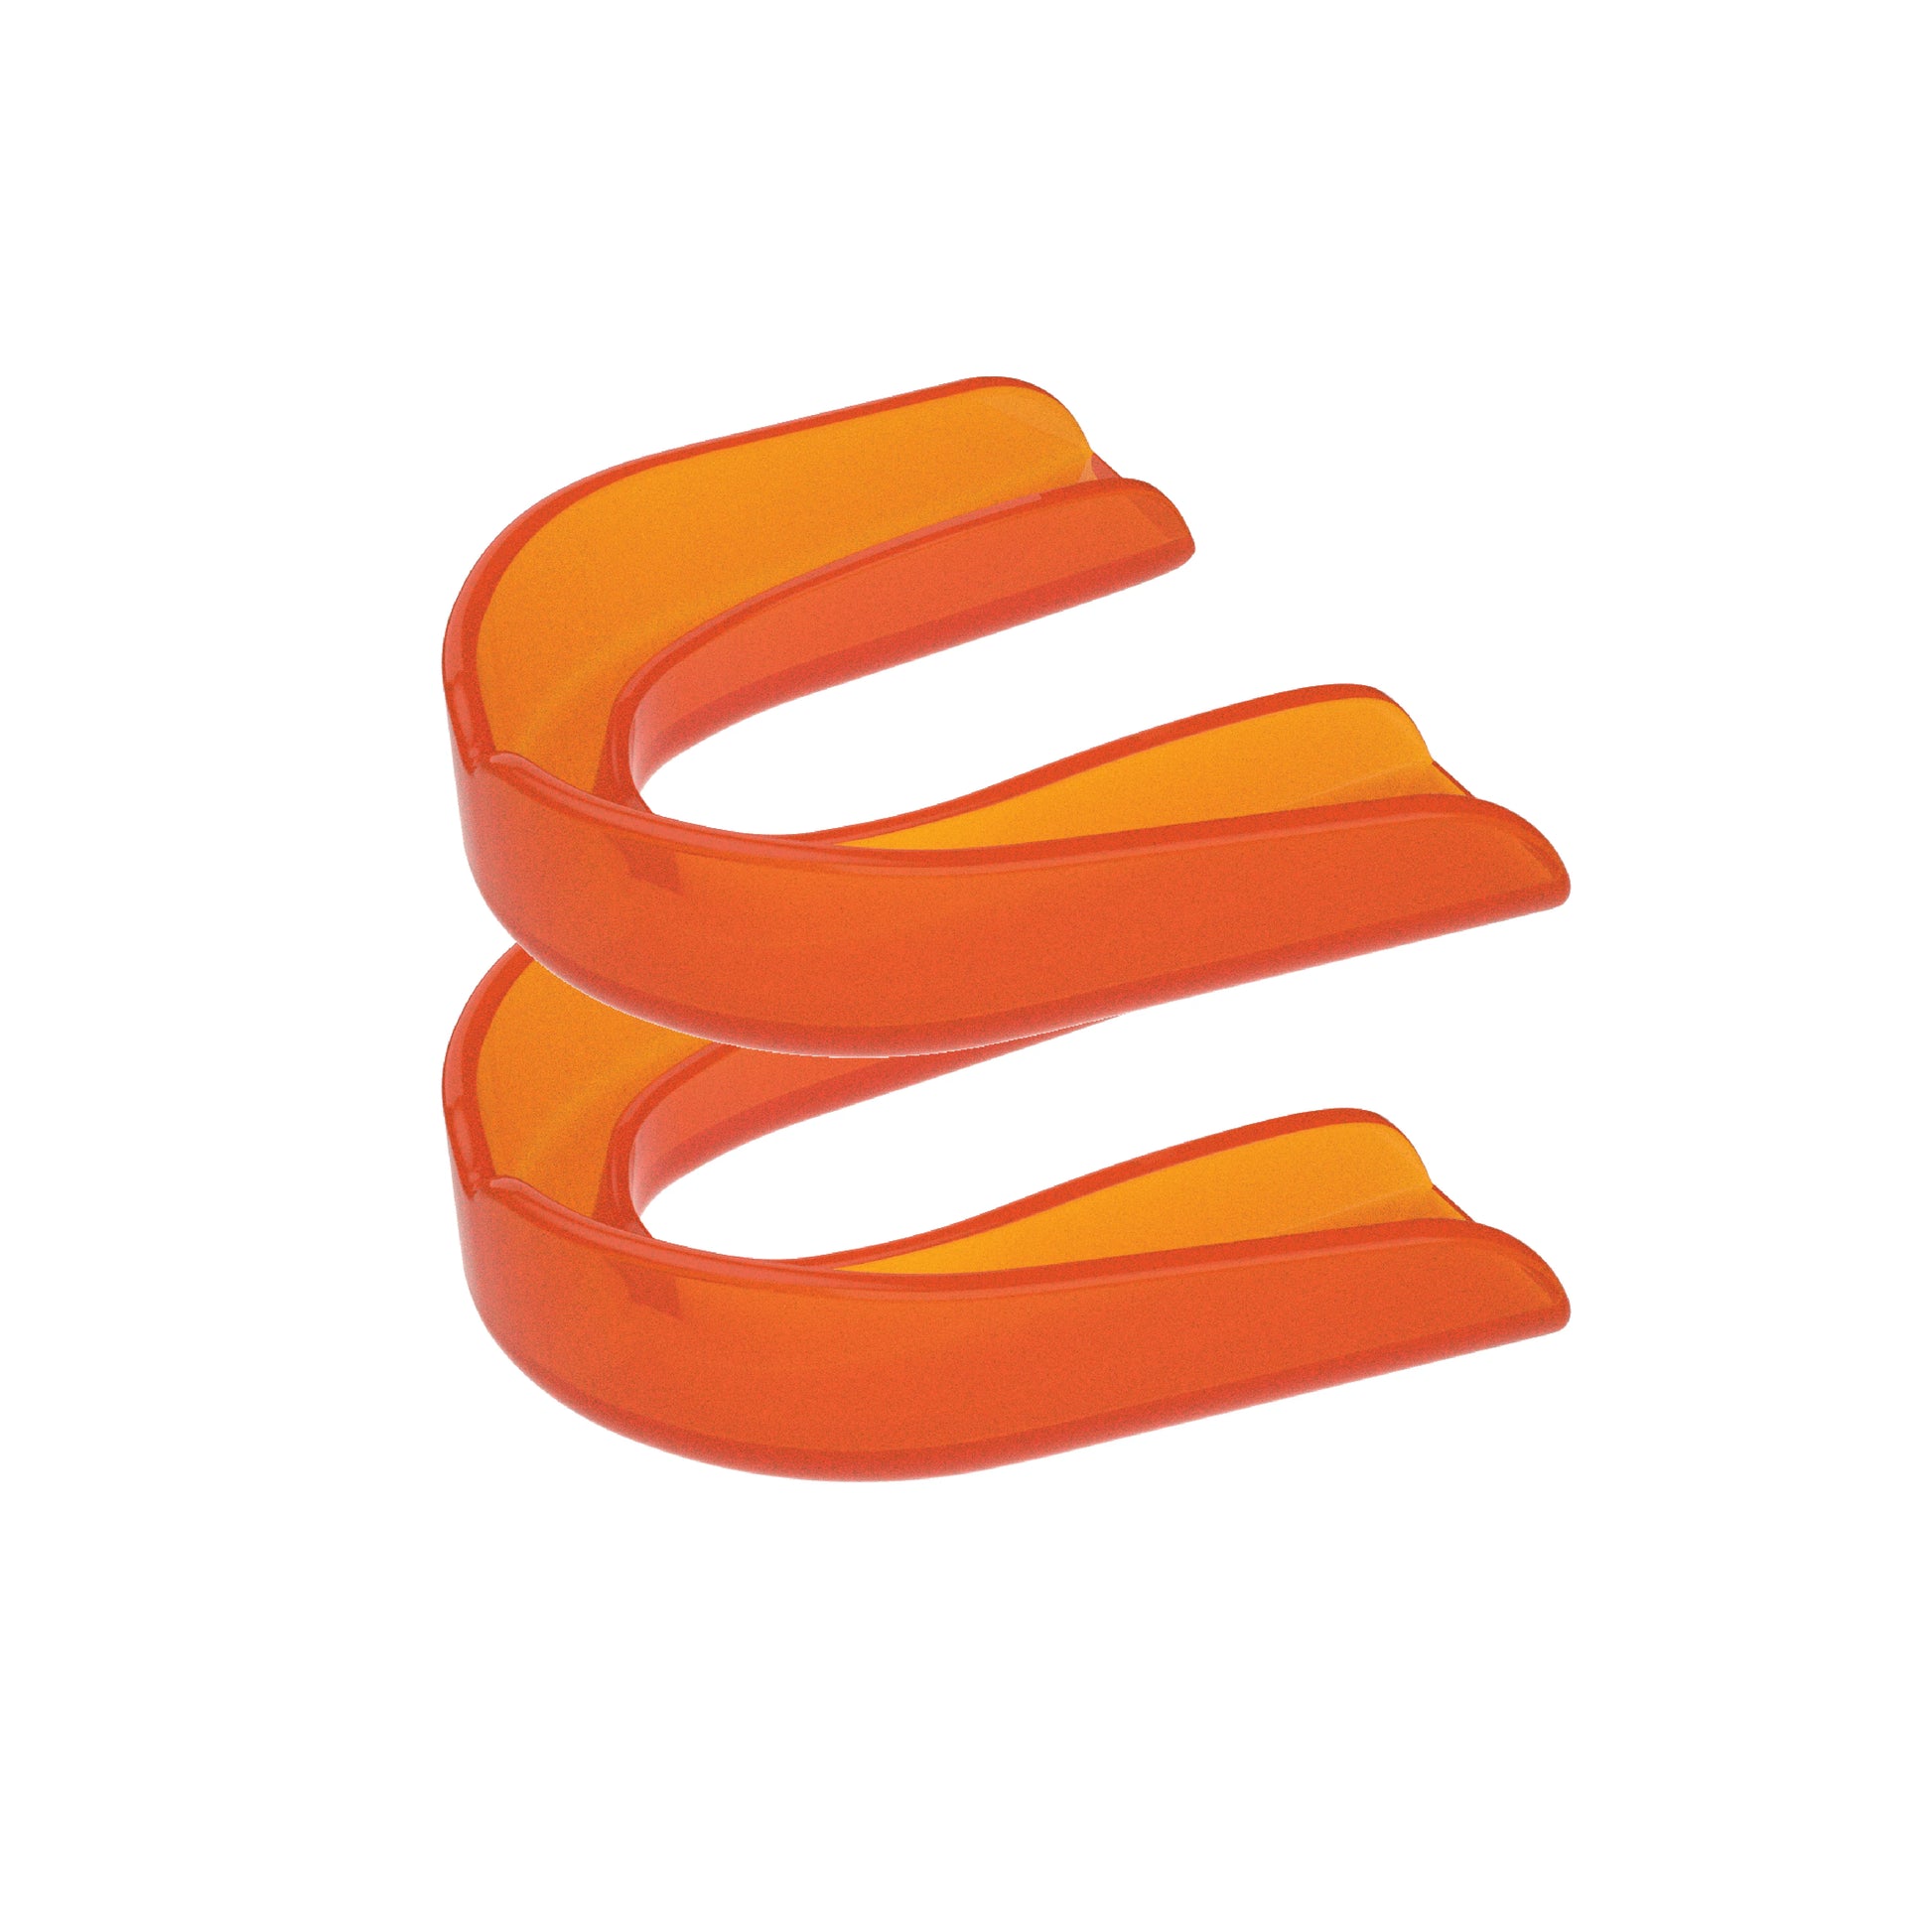 Two orange strapless mouth guards 